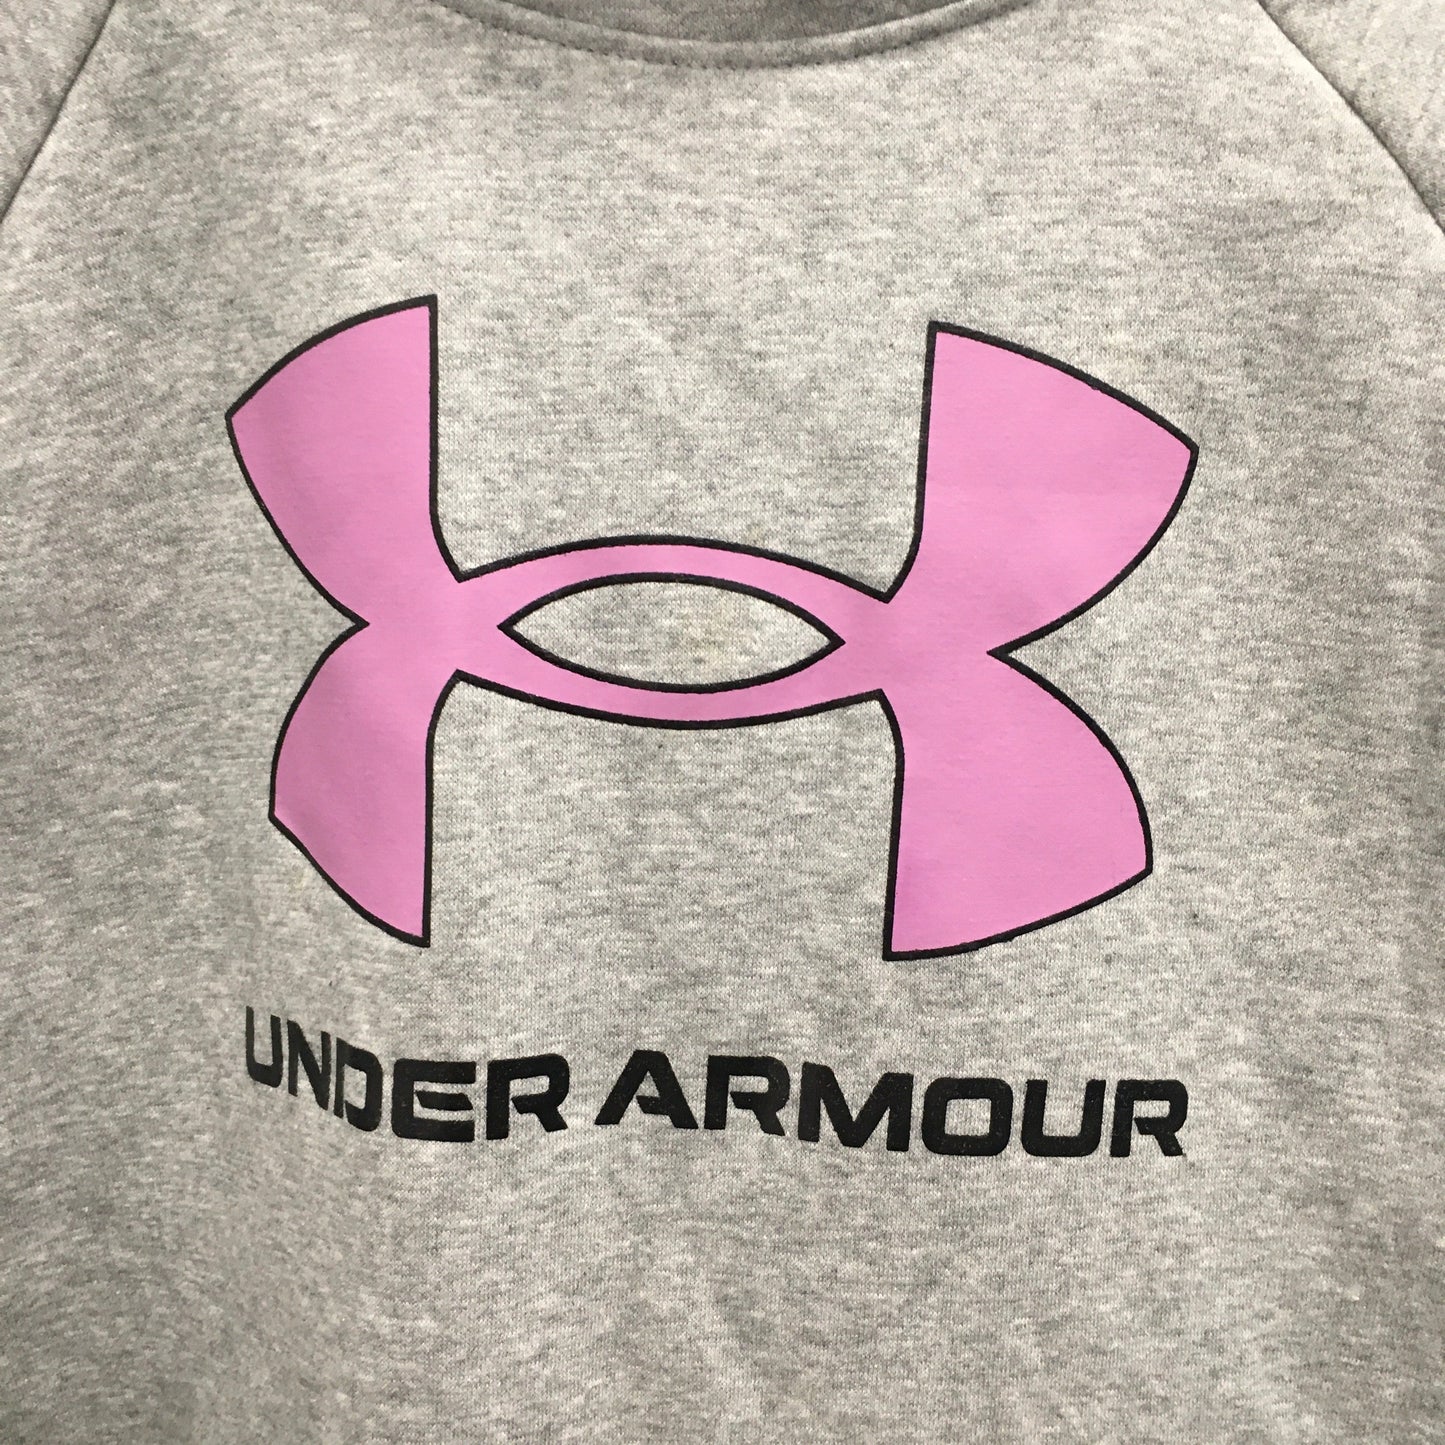 Athletic Sweatshirt Hoodie By Under Armour  Size: L